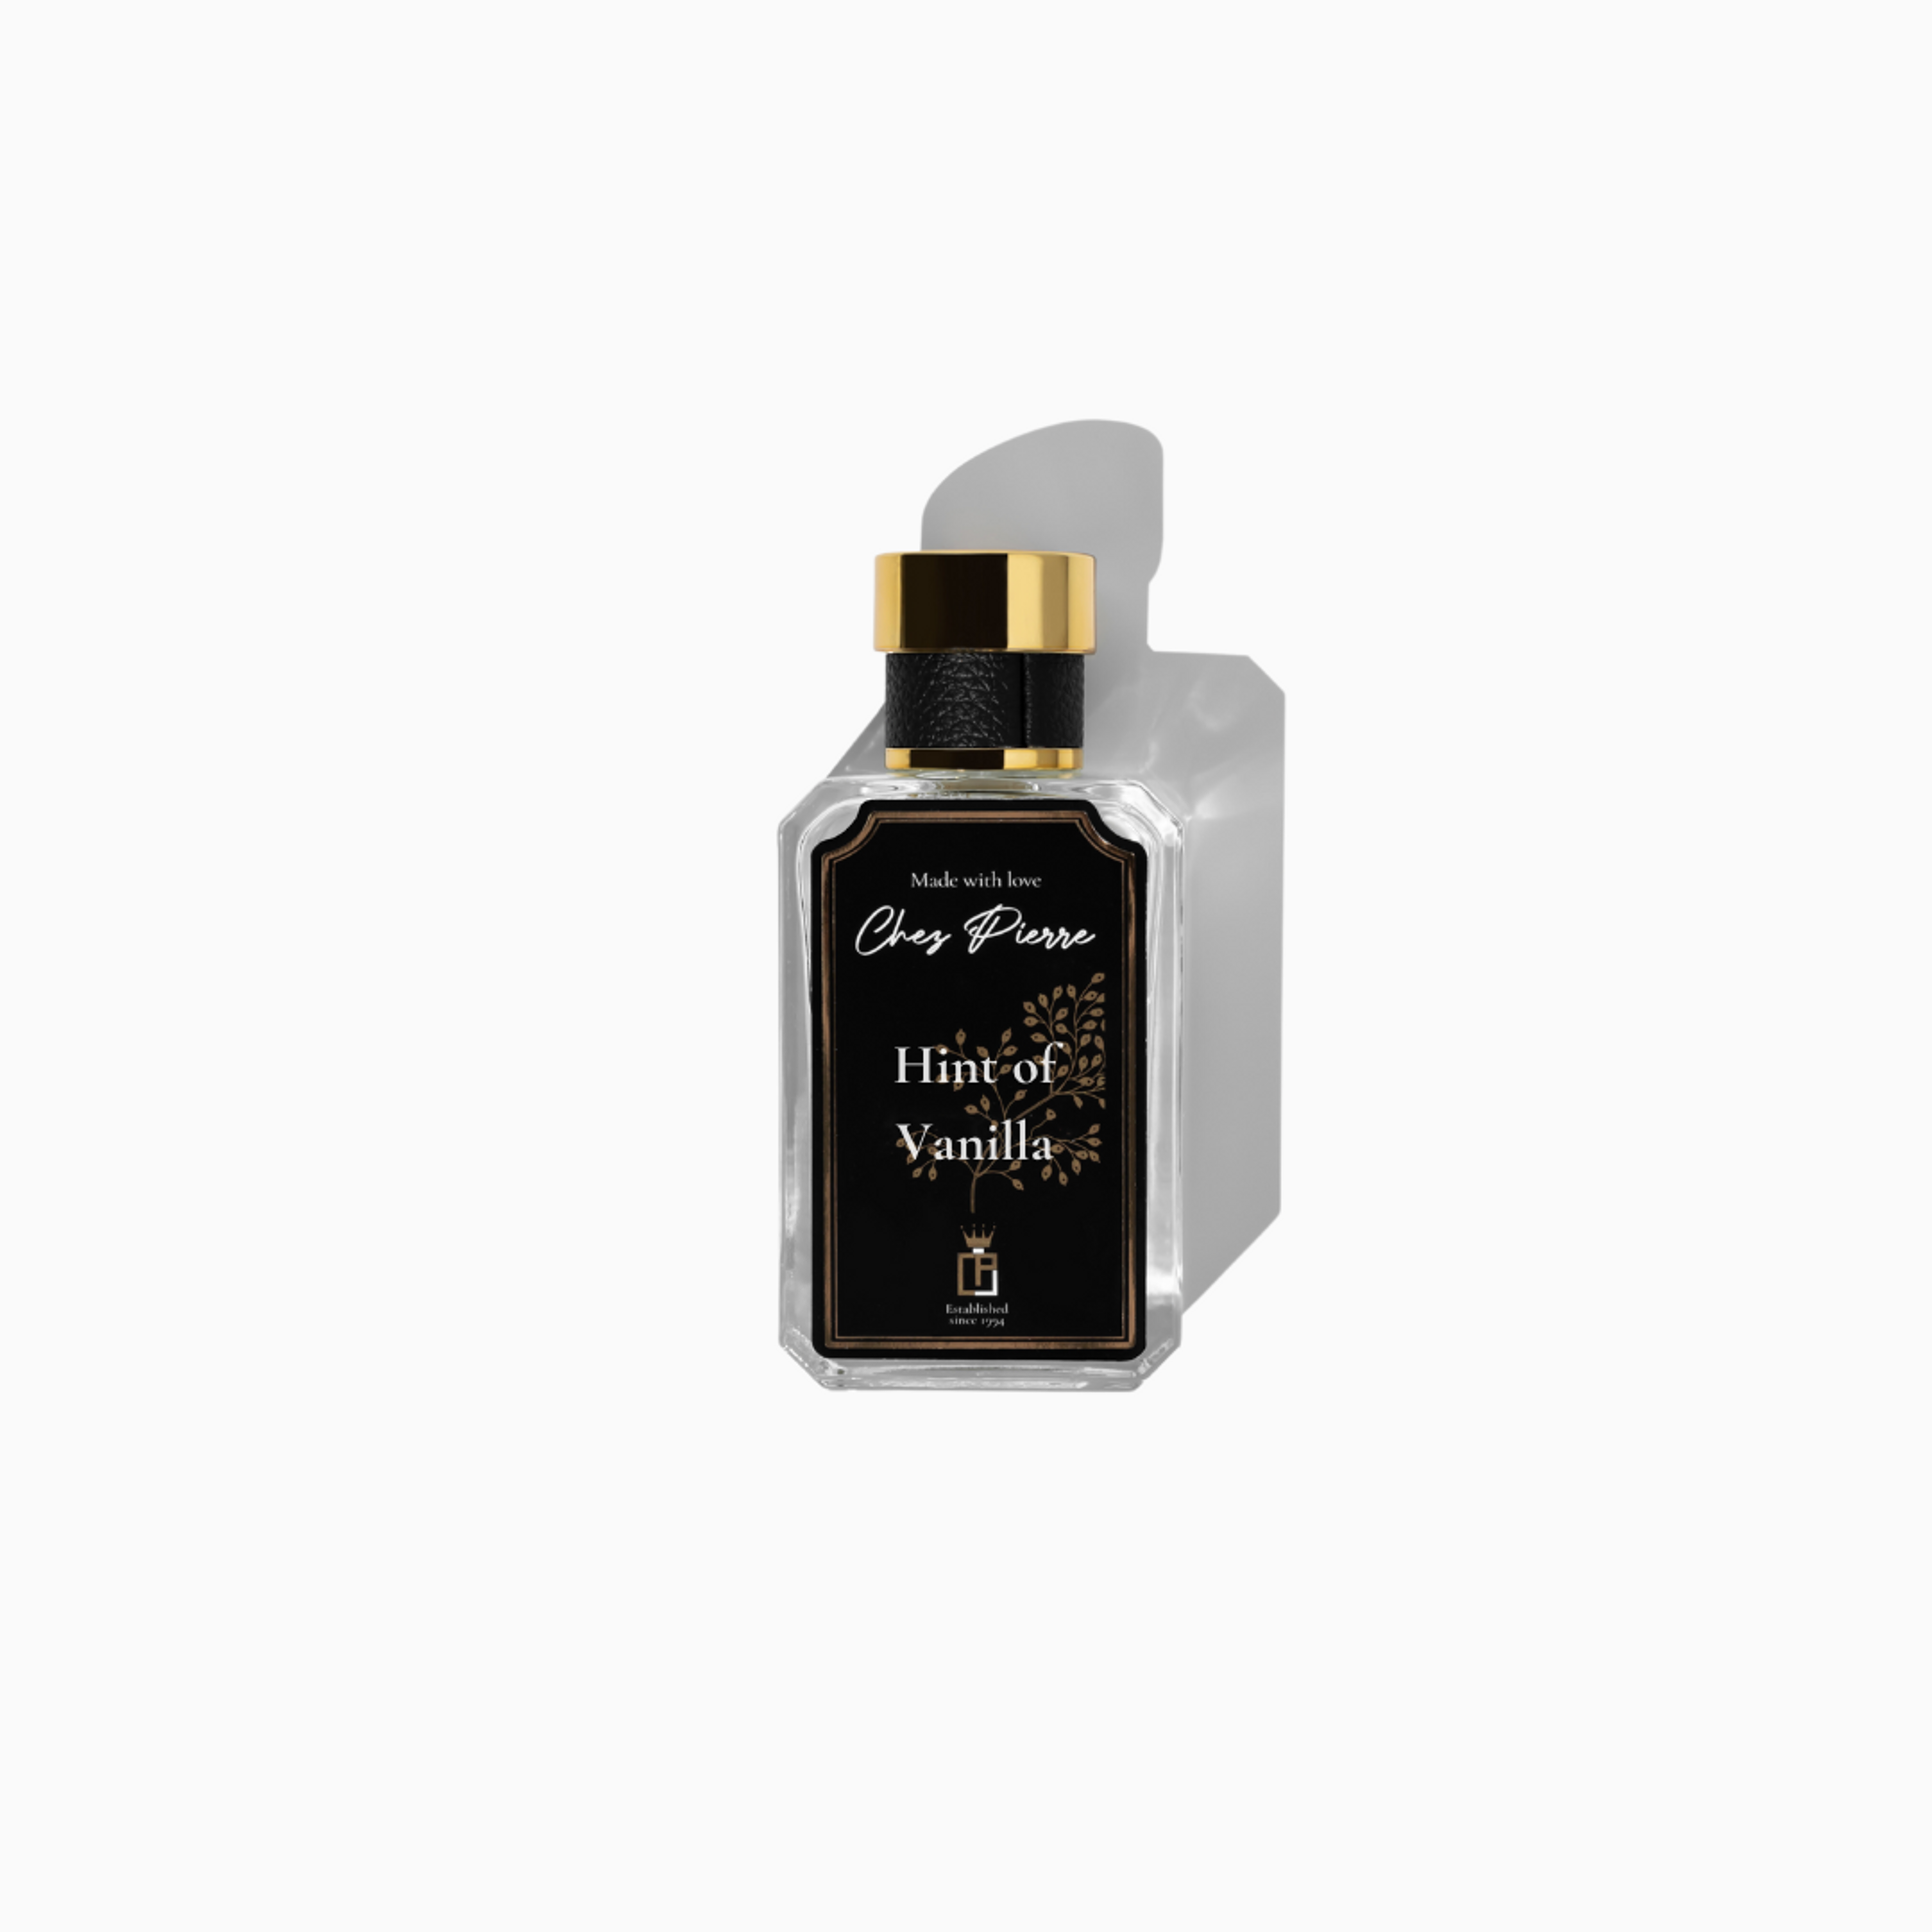 Hint of Vanilla - Inspired by Tom Ford Tobacco Vanille 